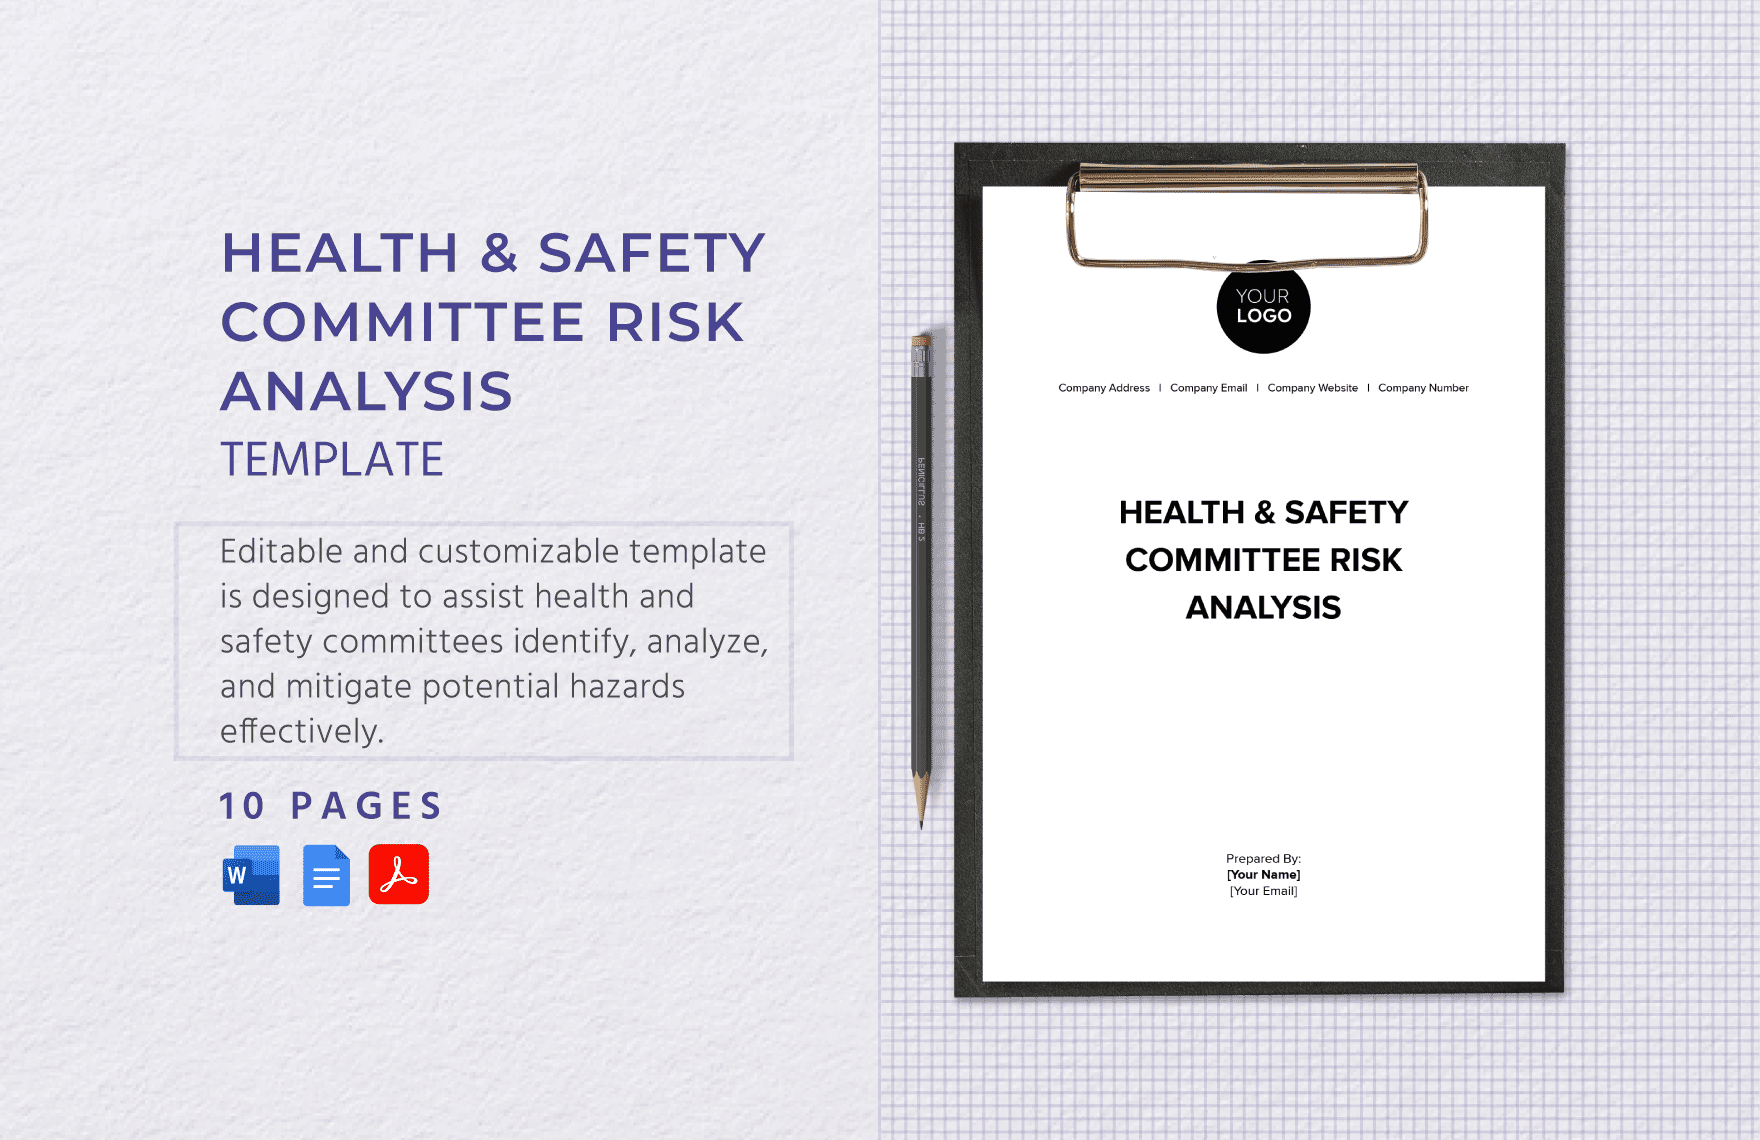 Health & Safety Committee Risk Analysis Template